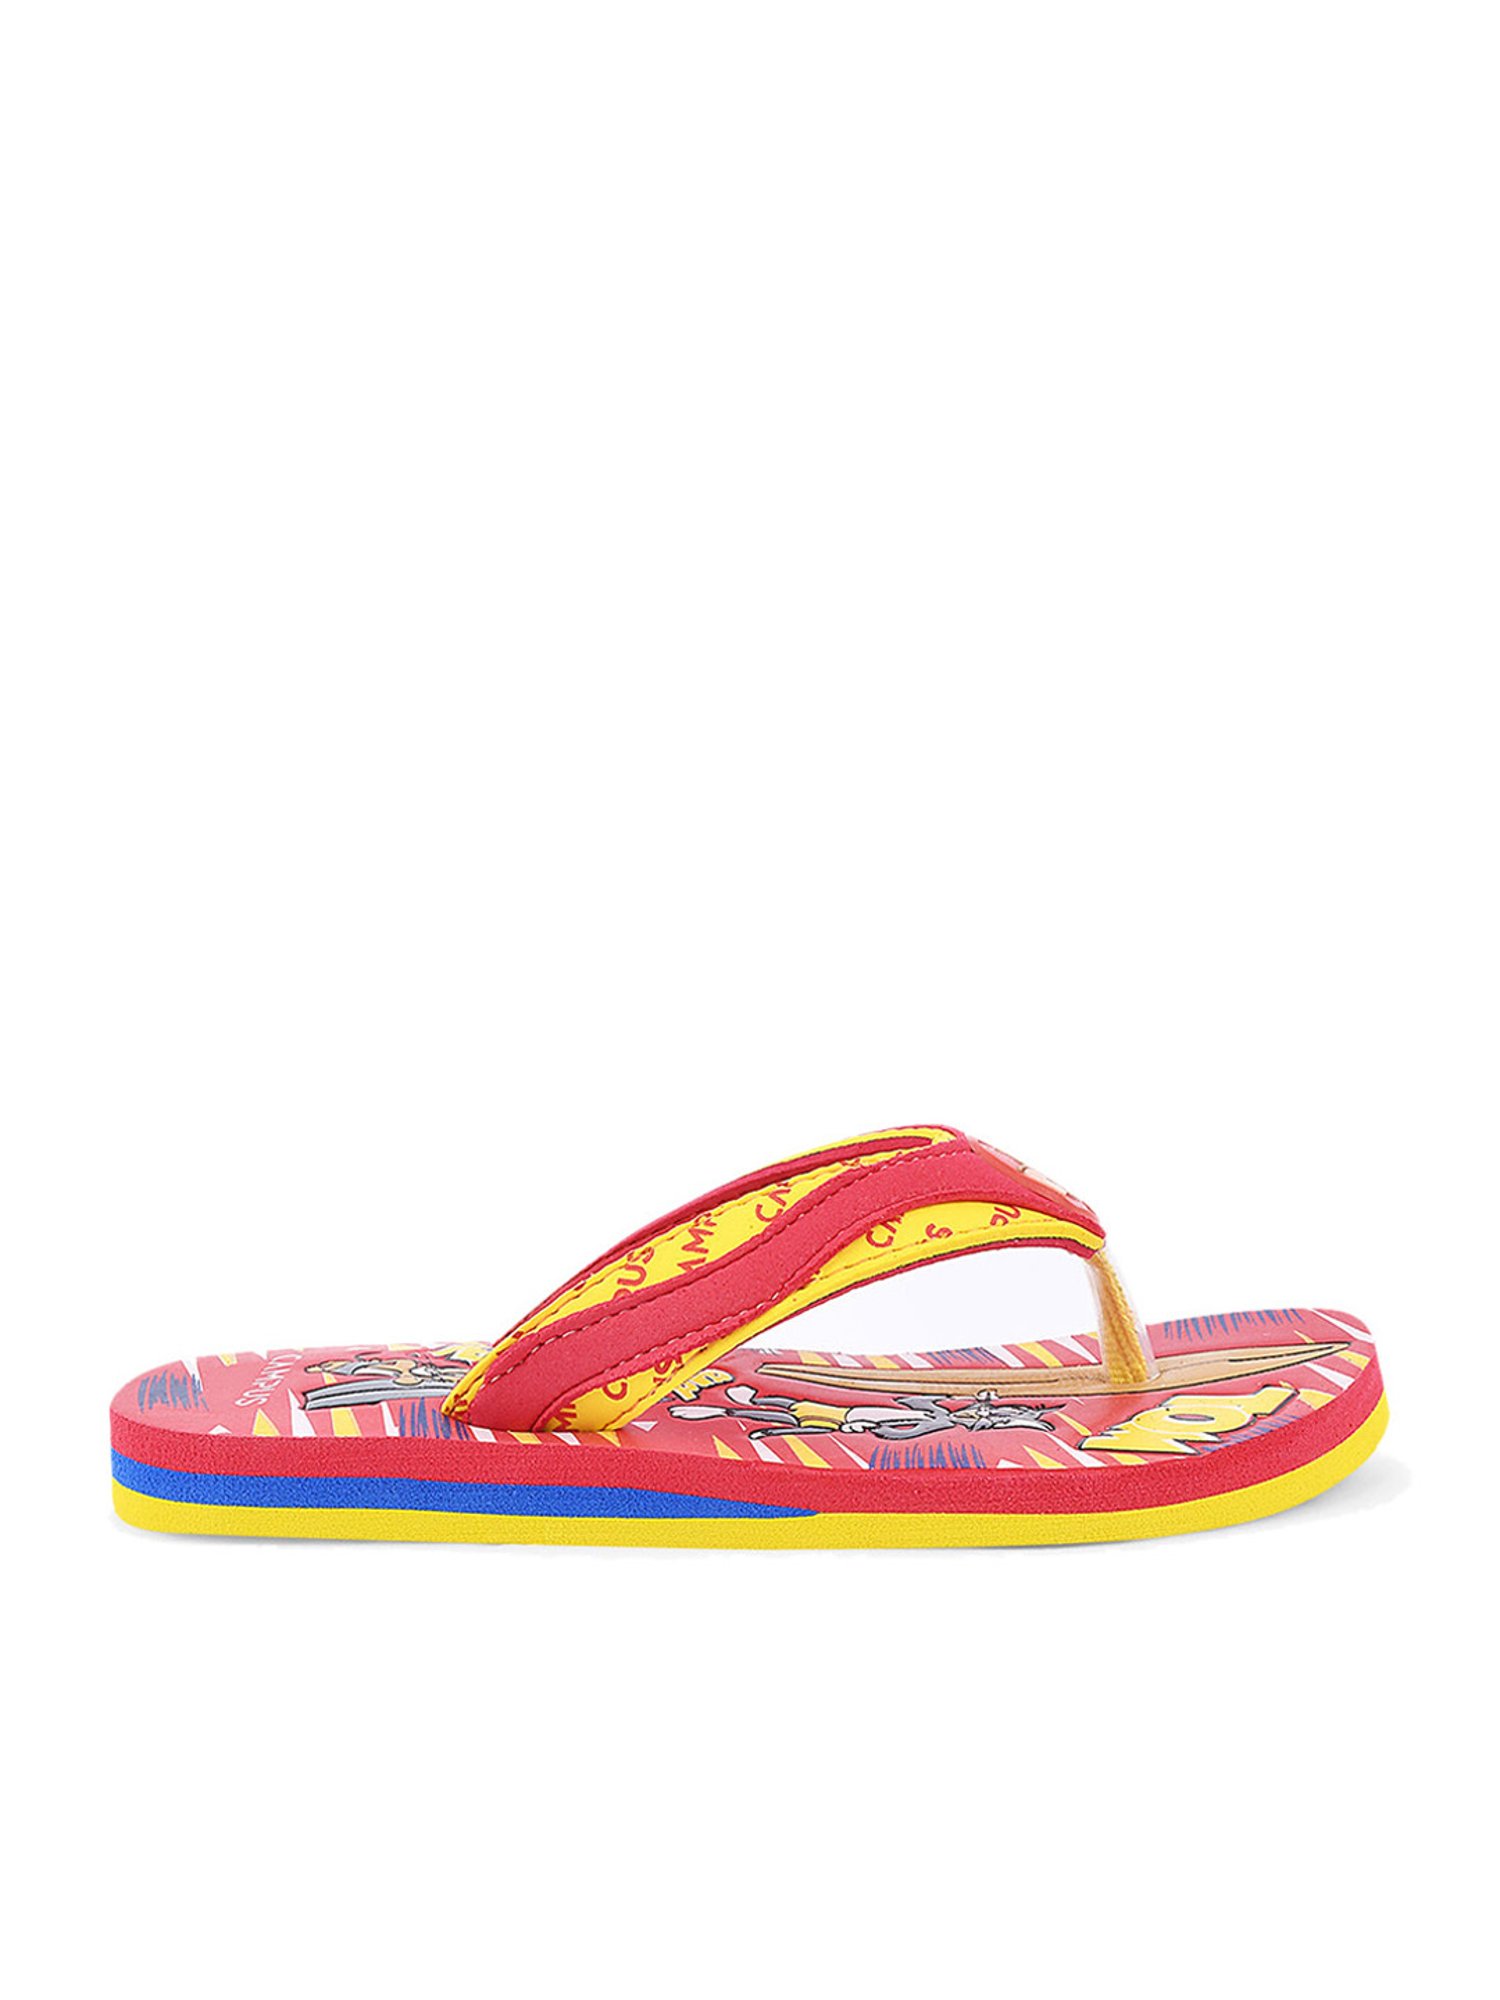 Ladies Hawai Slippers at best price in Kolkata by Twinflower Corporation |  ID: 25140753797